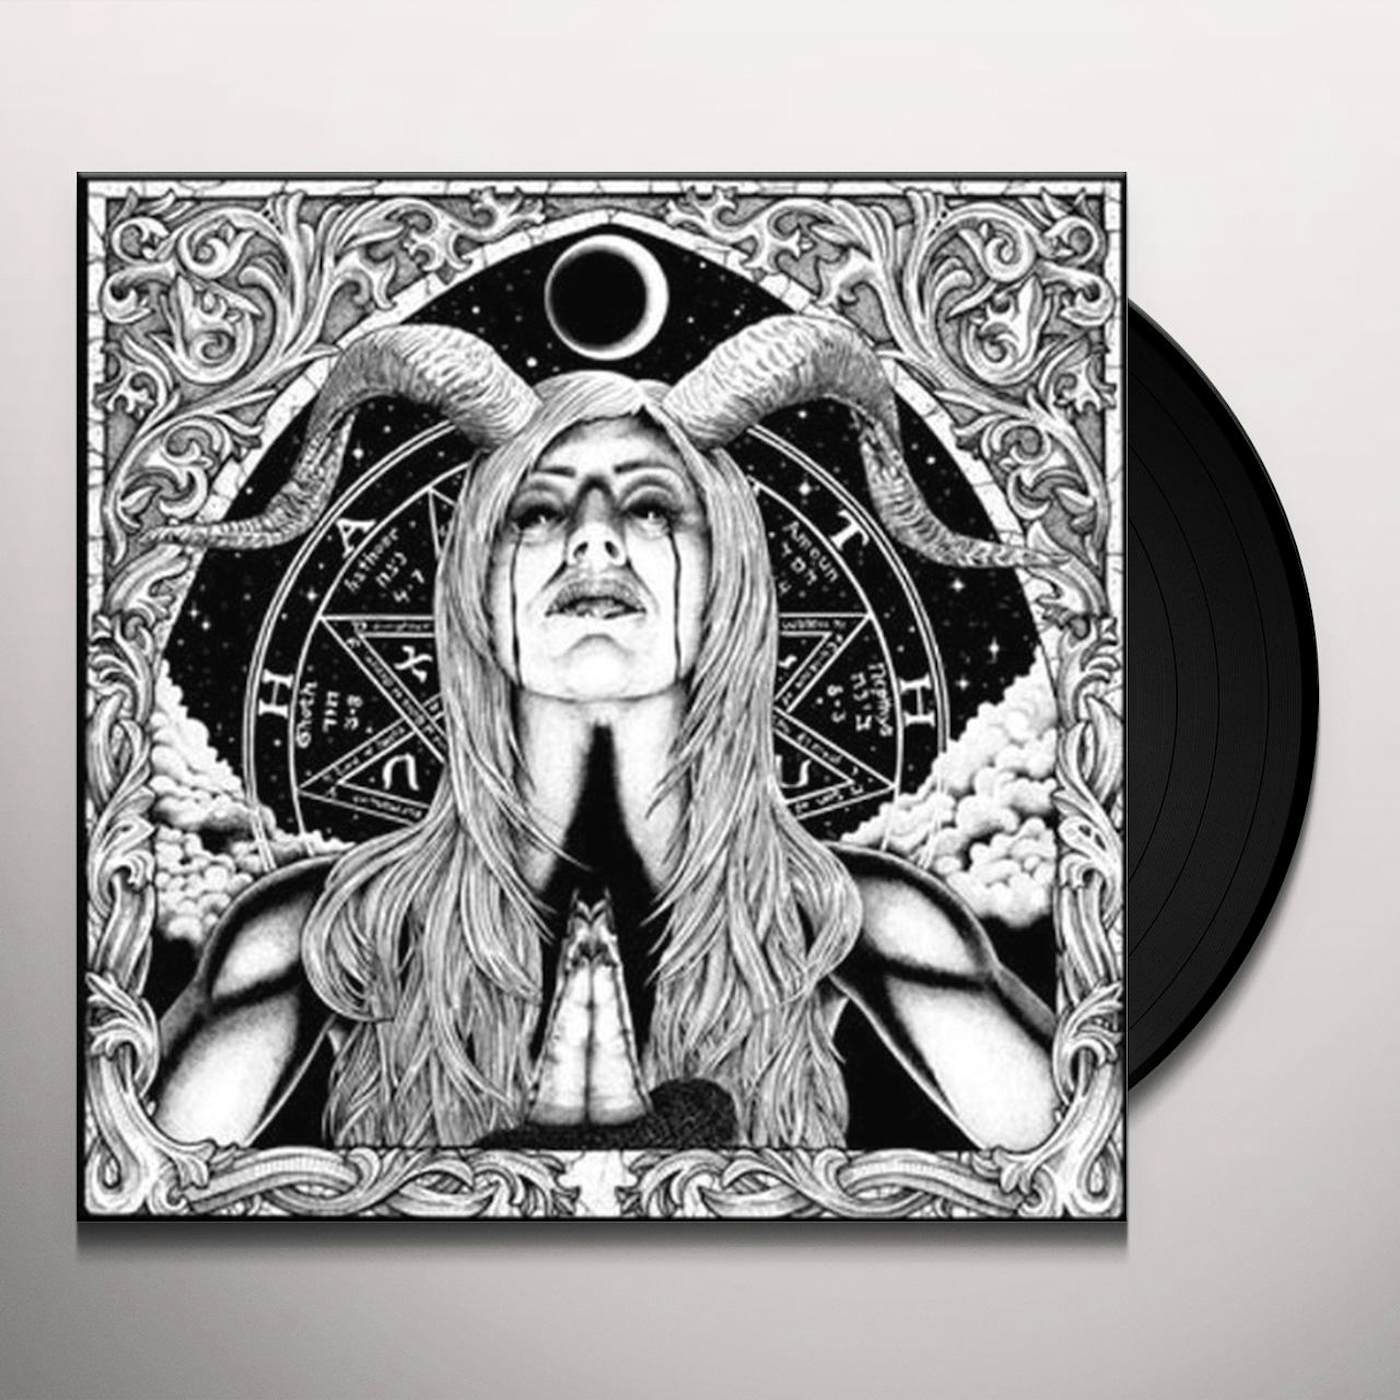 Ringworm Hammer Of The Witch Vinyl Record